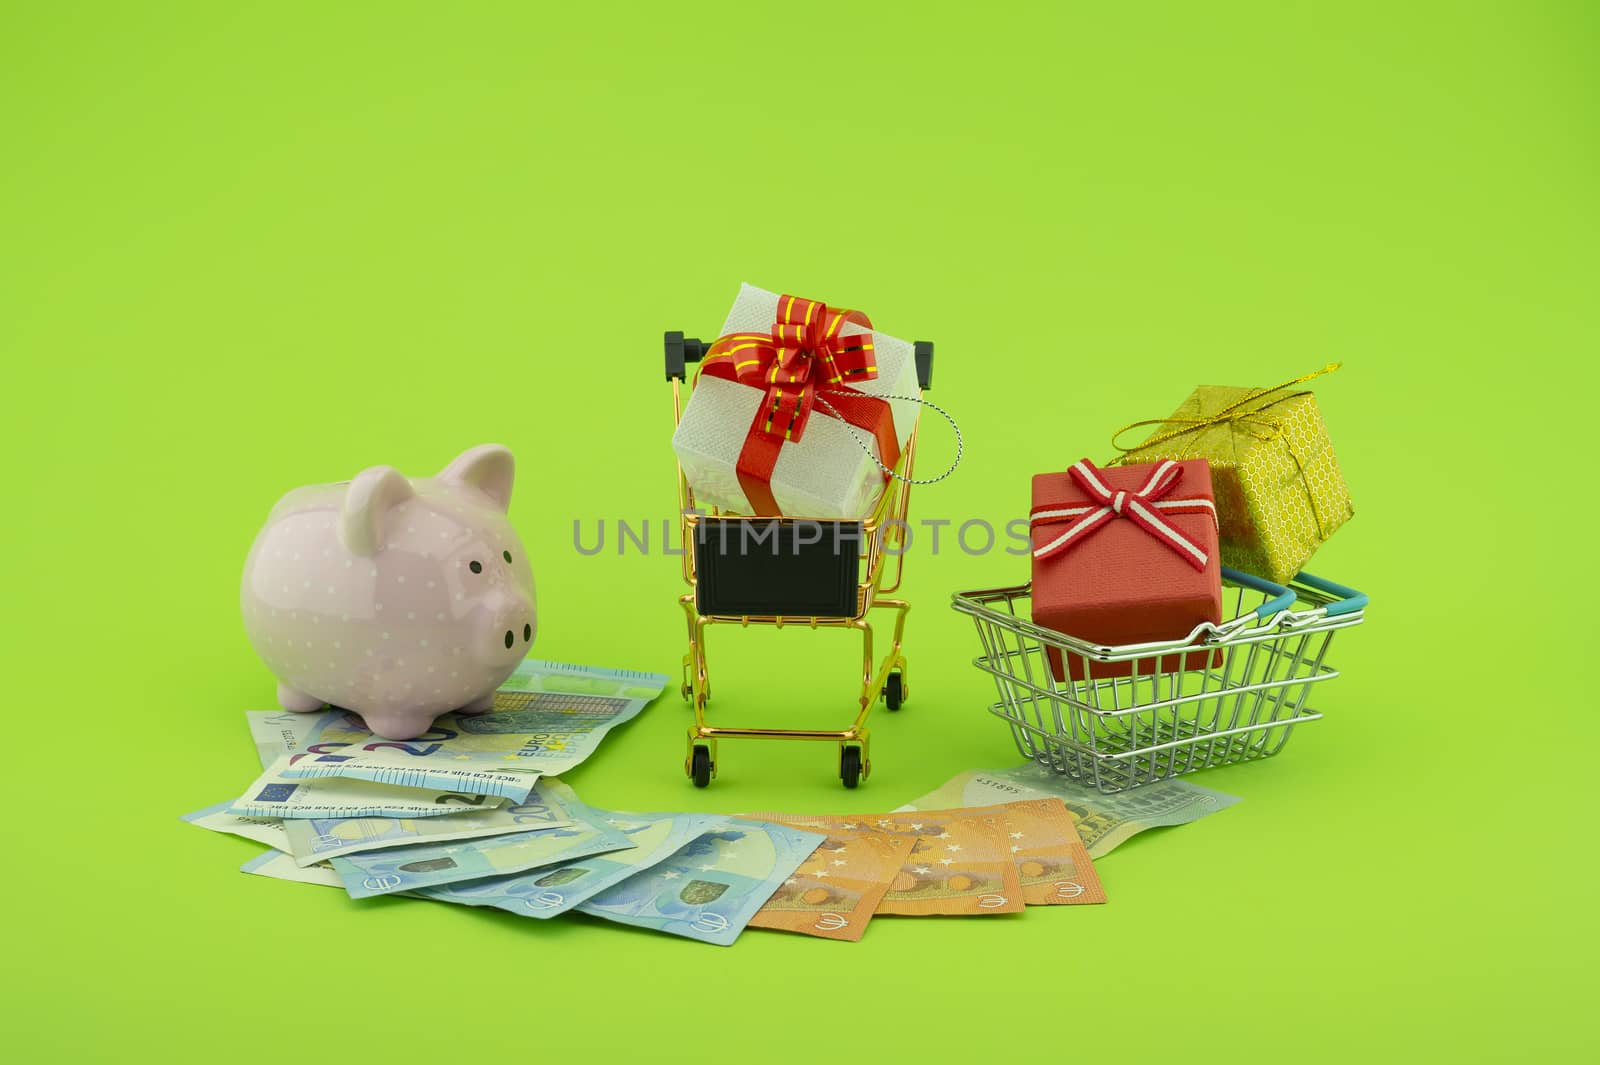 Cost of shopping or spending savings concept with banknotes scattered on a green background with a piggy bank, small wire shopping basket and cart with gifts with decorative red ribbons